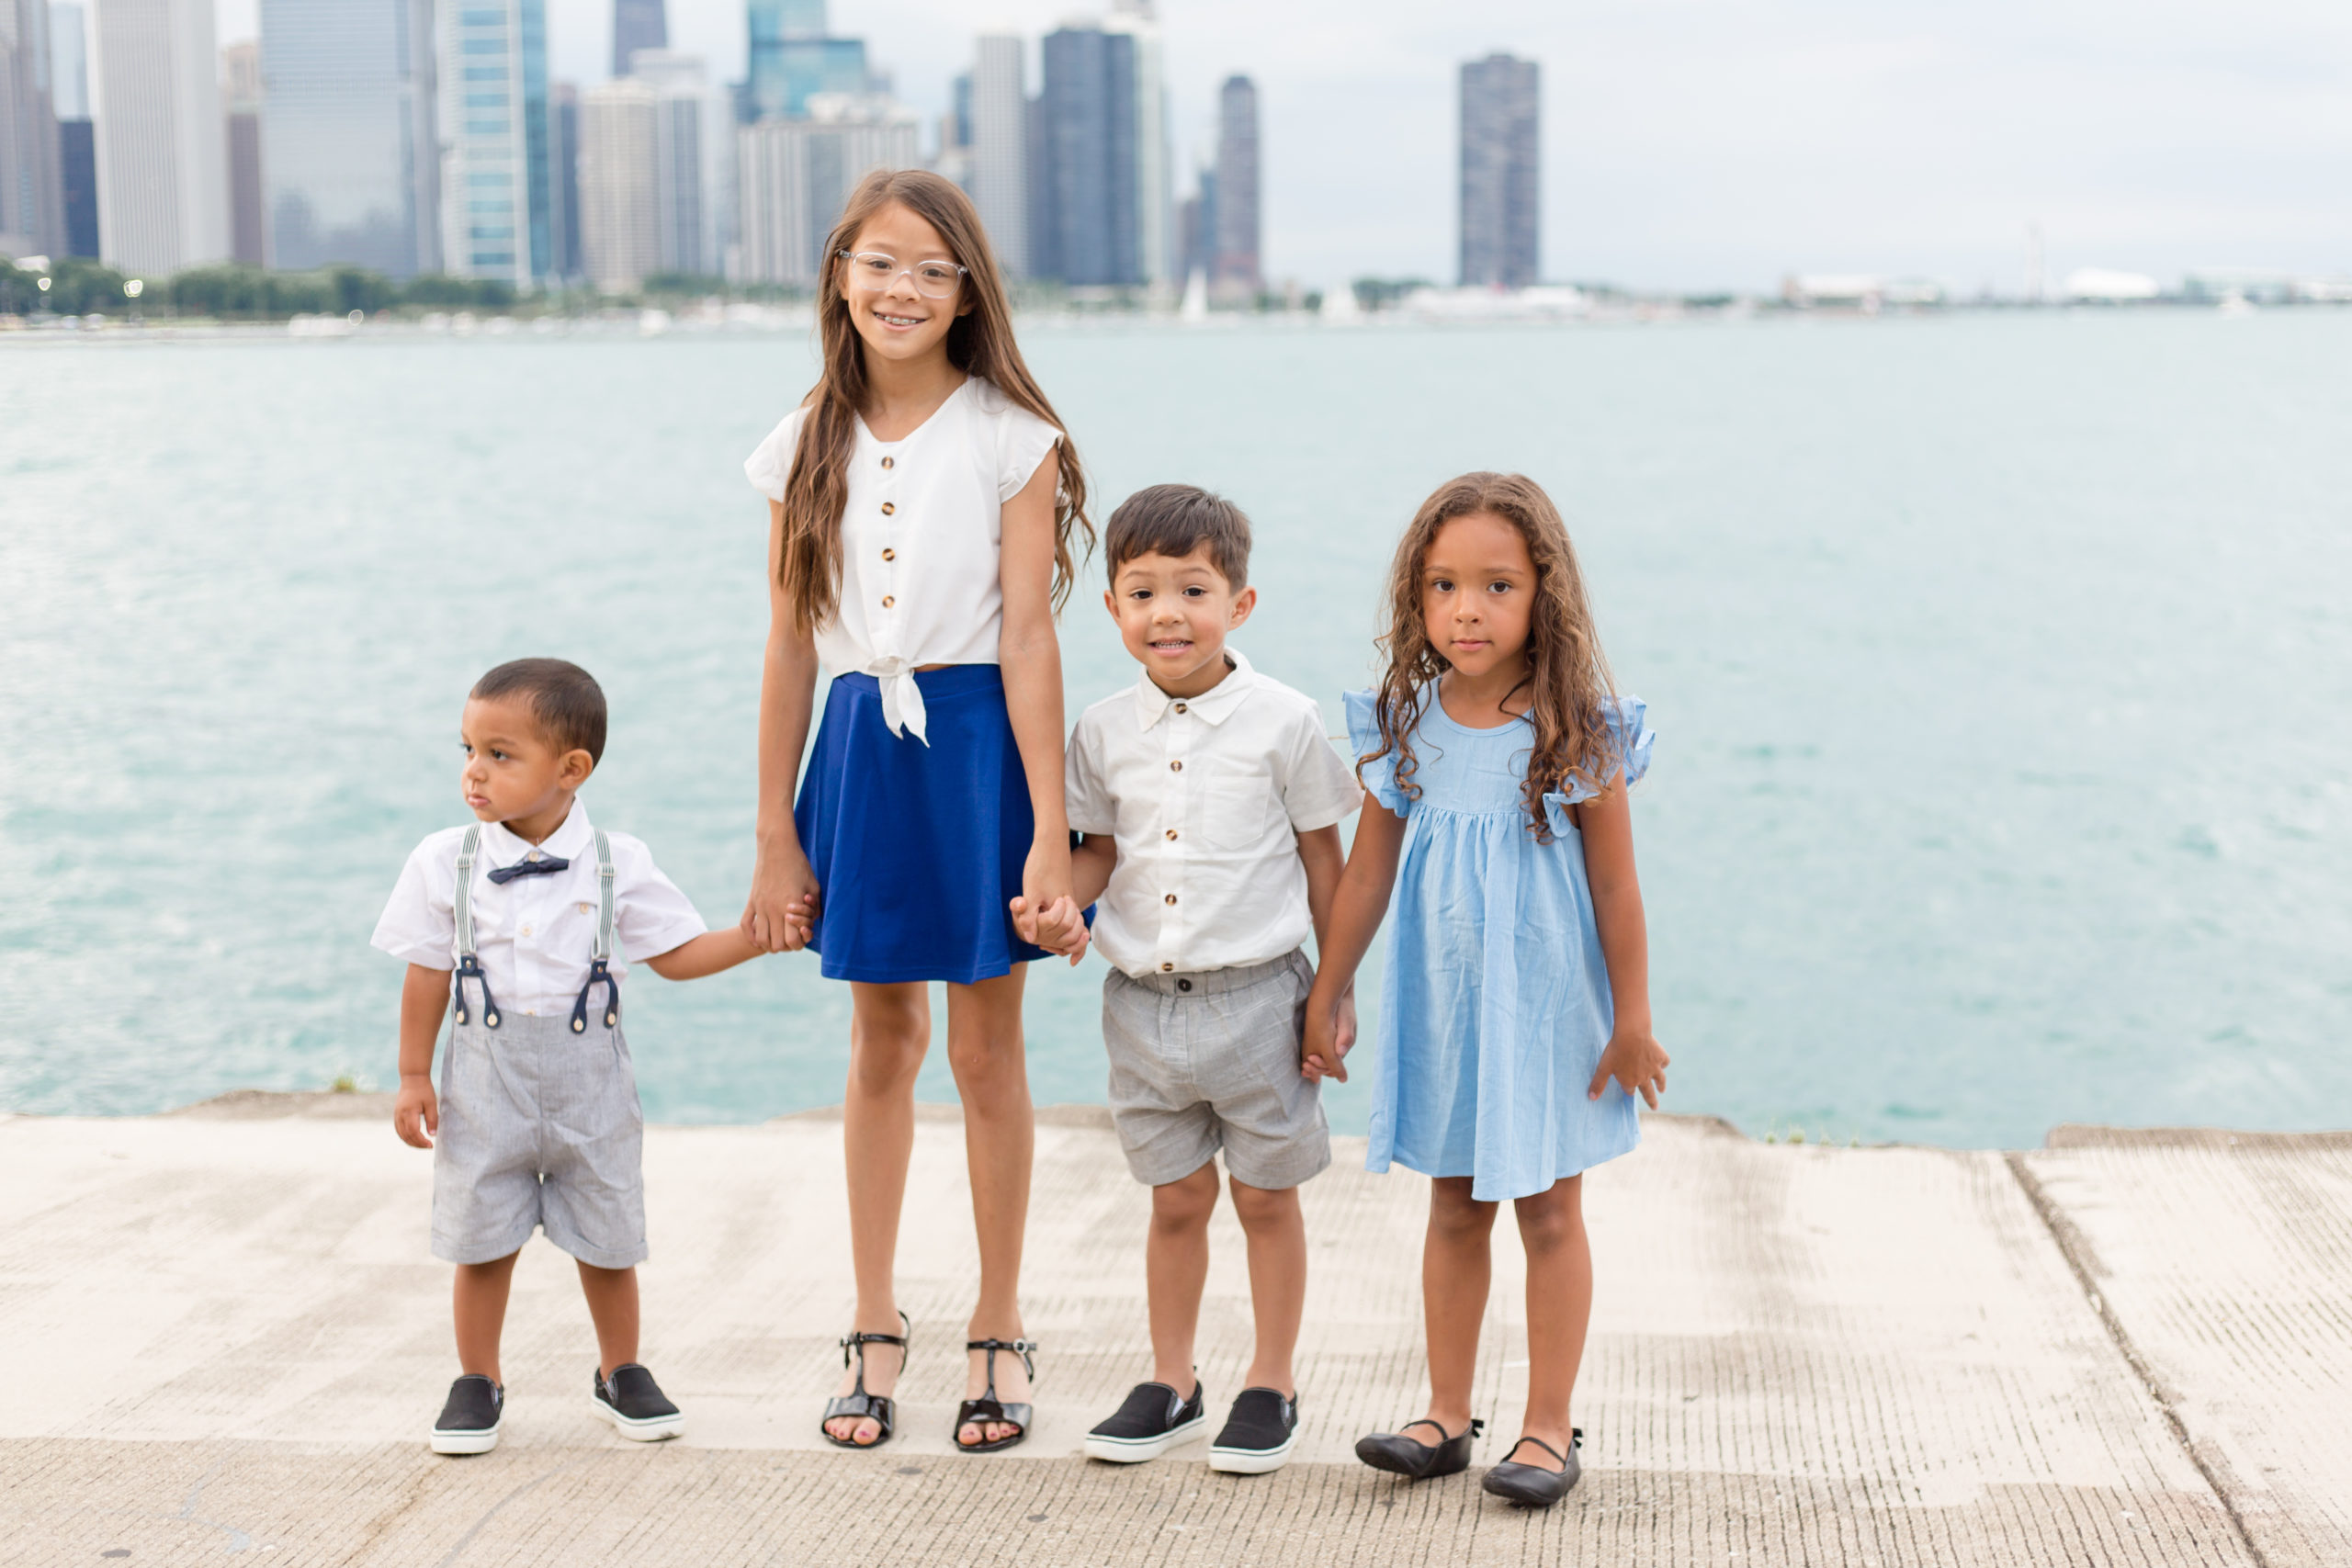 These 4 cousins are standing holding hands in front of a beautiful lake. 1st cousin is wearing a white shirt, bow tie, suspenders and grey shorts. 2nd cousin is wearing a white shirt that ties at the wait and a royal blue skirt. 3rd cousin is wearing a white button up shirt and grey shorts. 4th cousin is wearing a light blue flutter sleeve dress. Check out more about this gorgeous extended family session in the blog.